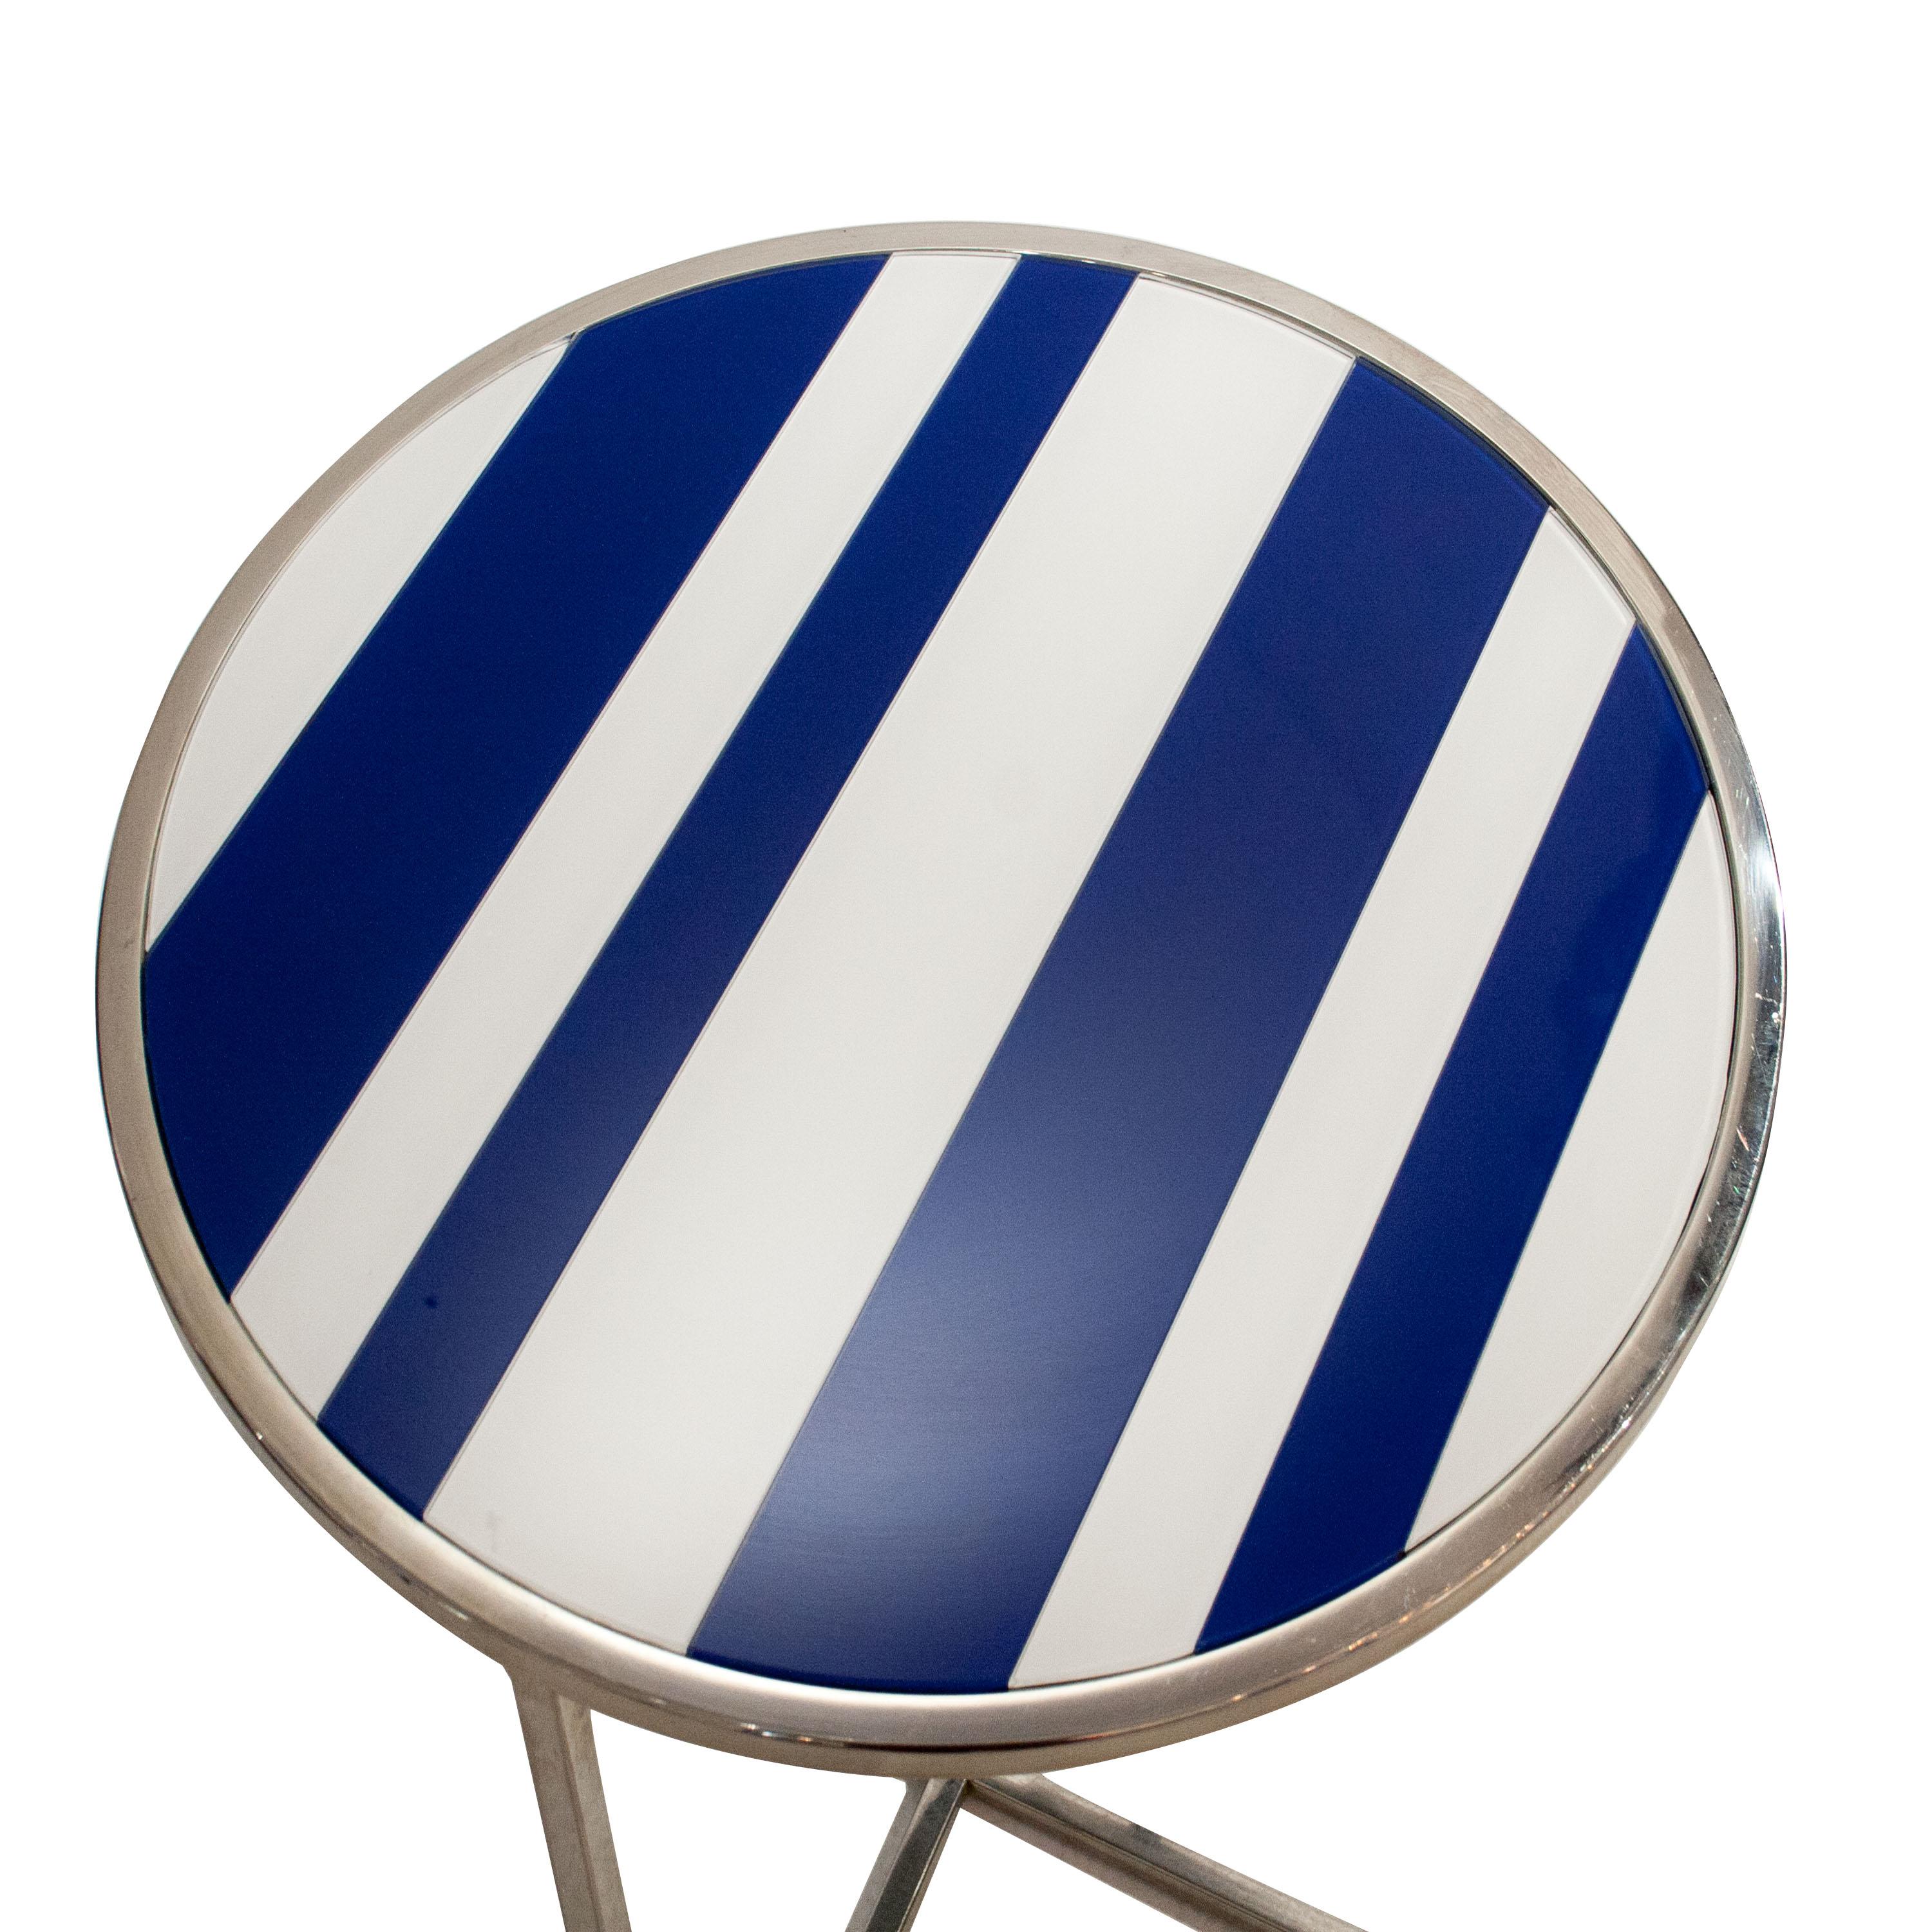 Spanish Contemporary Chromed Steel Blue and White Glass Round Center Table, Italy, 1970